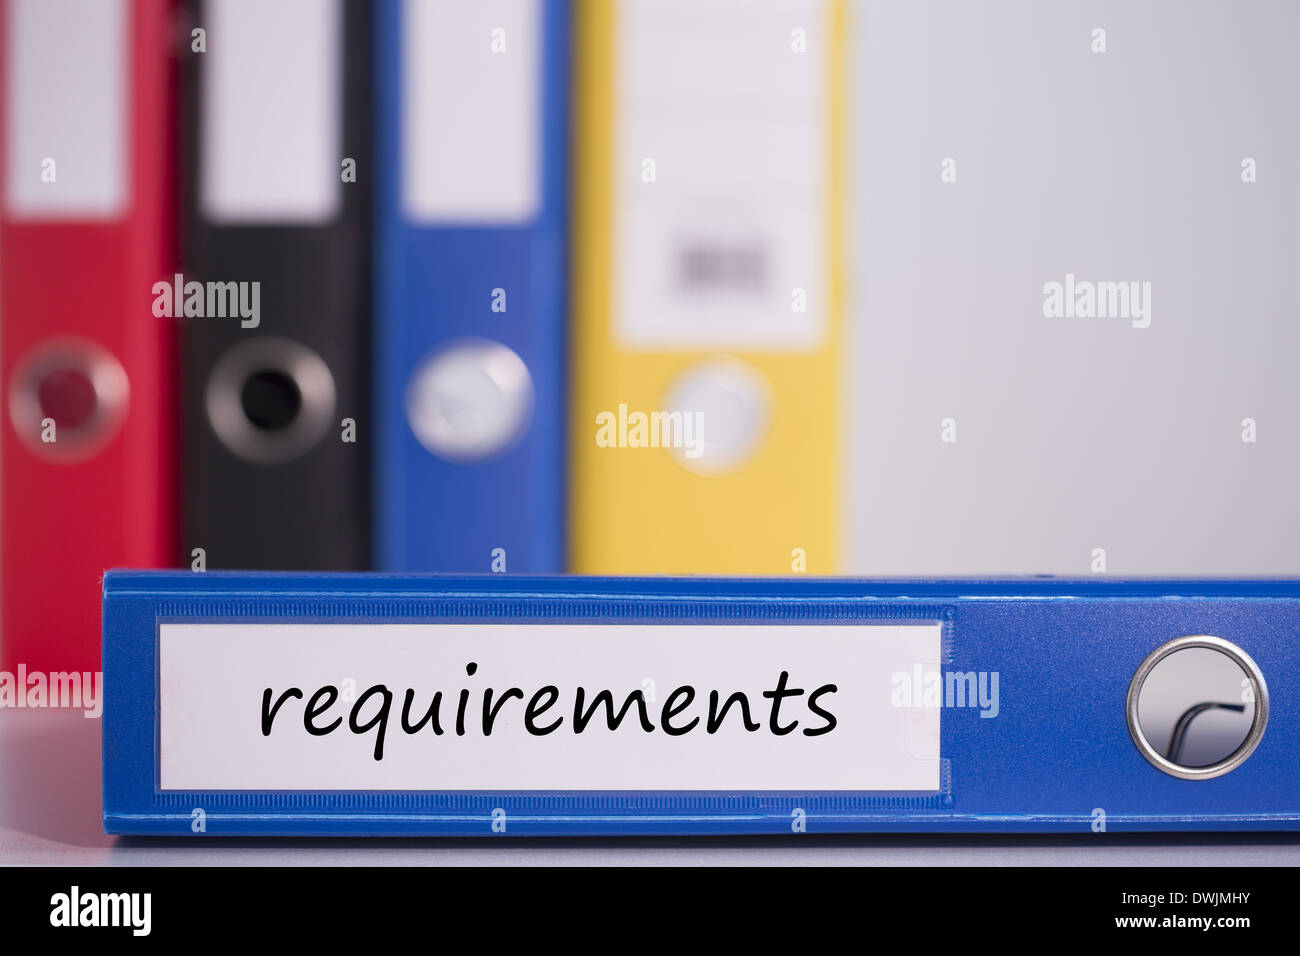 Requirements on blue business binder Stock Photo